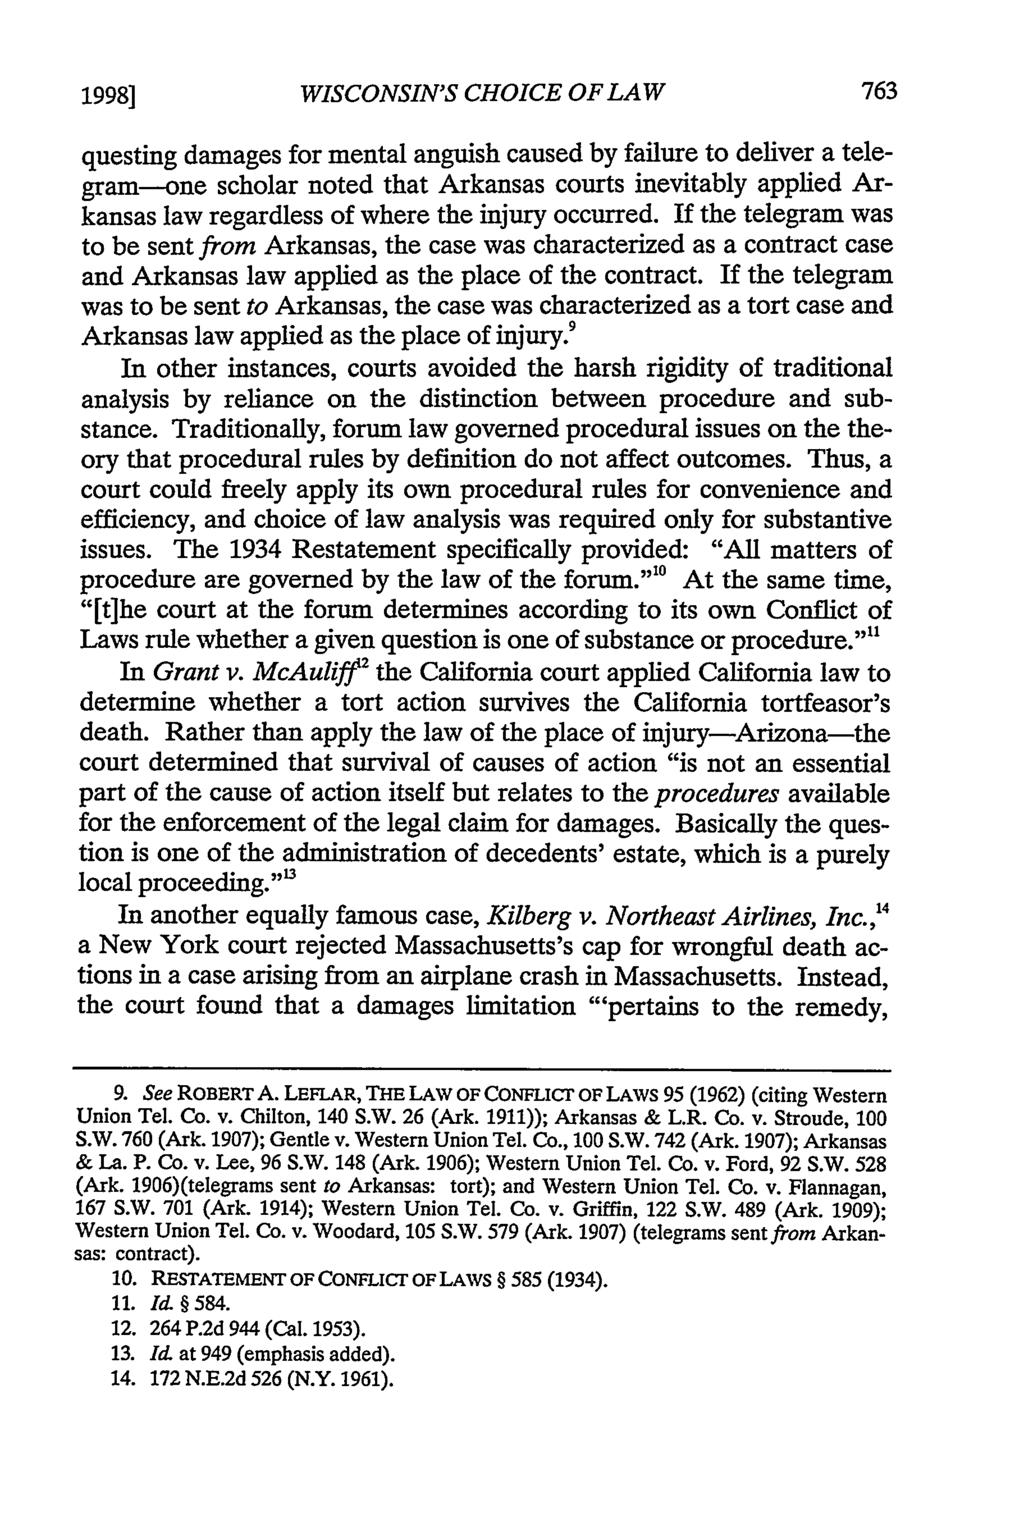 1998] WISCONSIN'S CHOICE OF LAW questing damages for mental anguish caused by failure to deliver a telegram-one scholar noted that Arkansas courts inevitably applied Arkansas law regardless of where